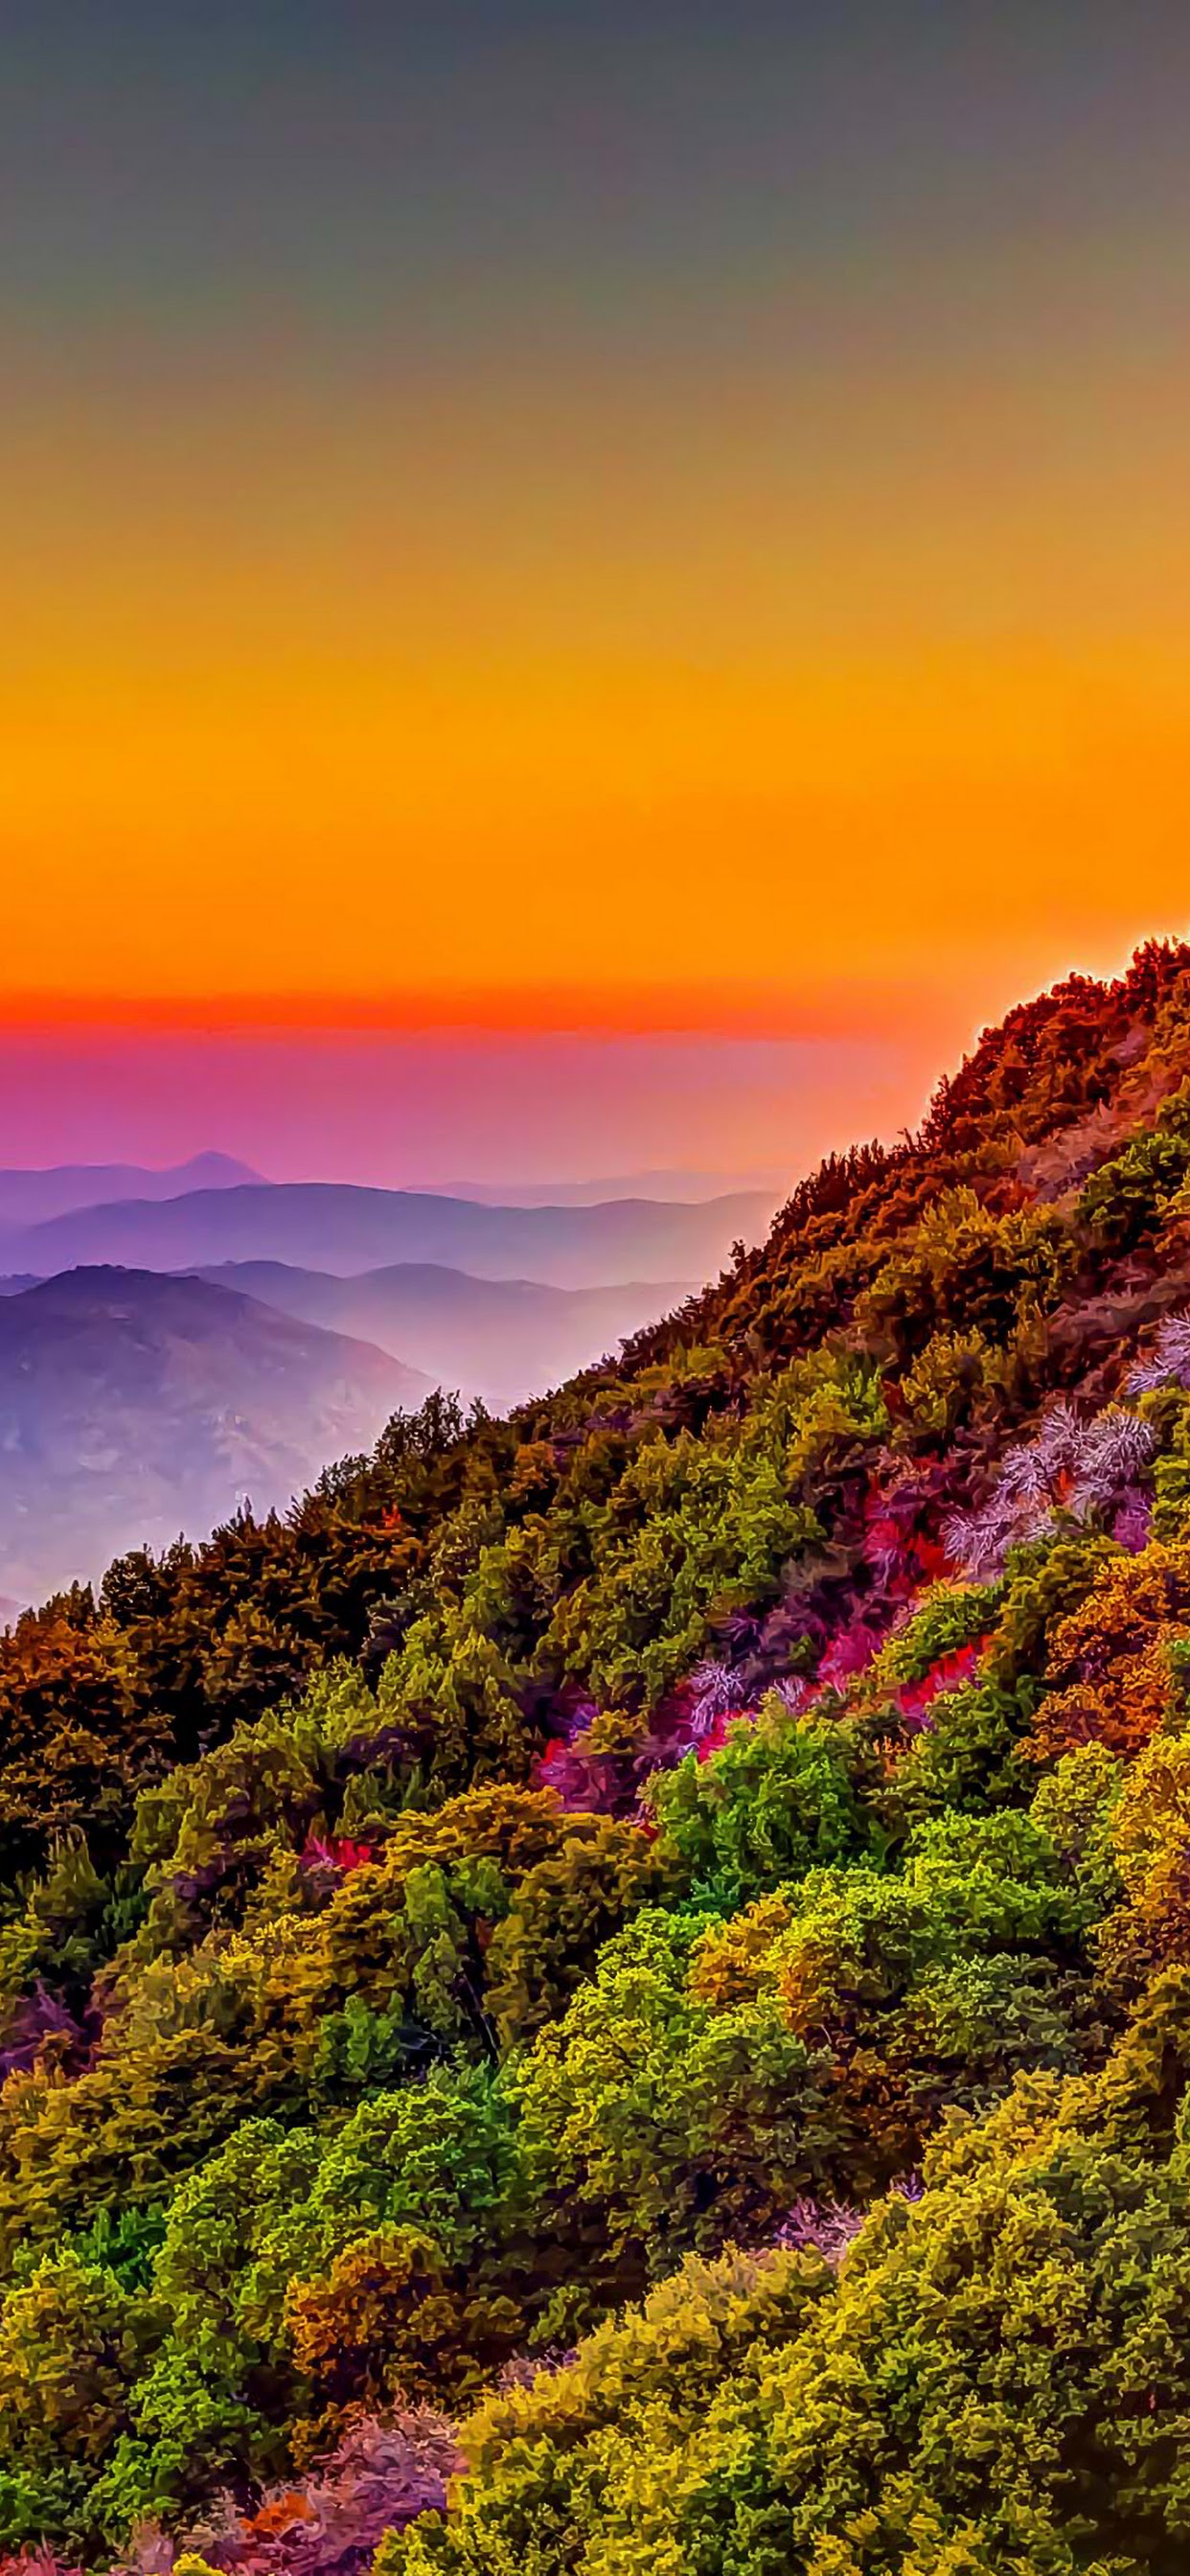 Mountain colorful forest nature sunset scenery k wallpaper